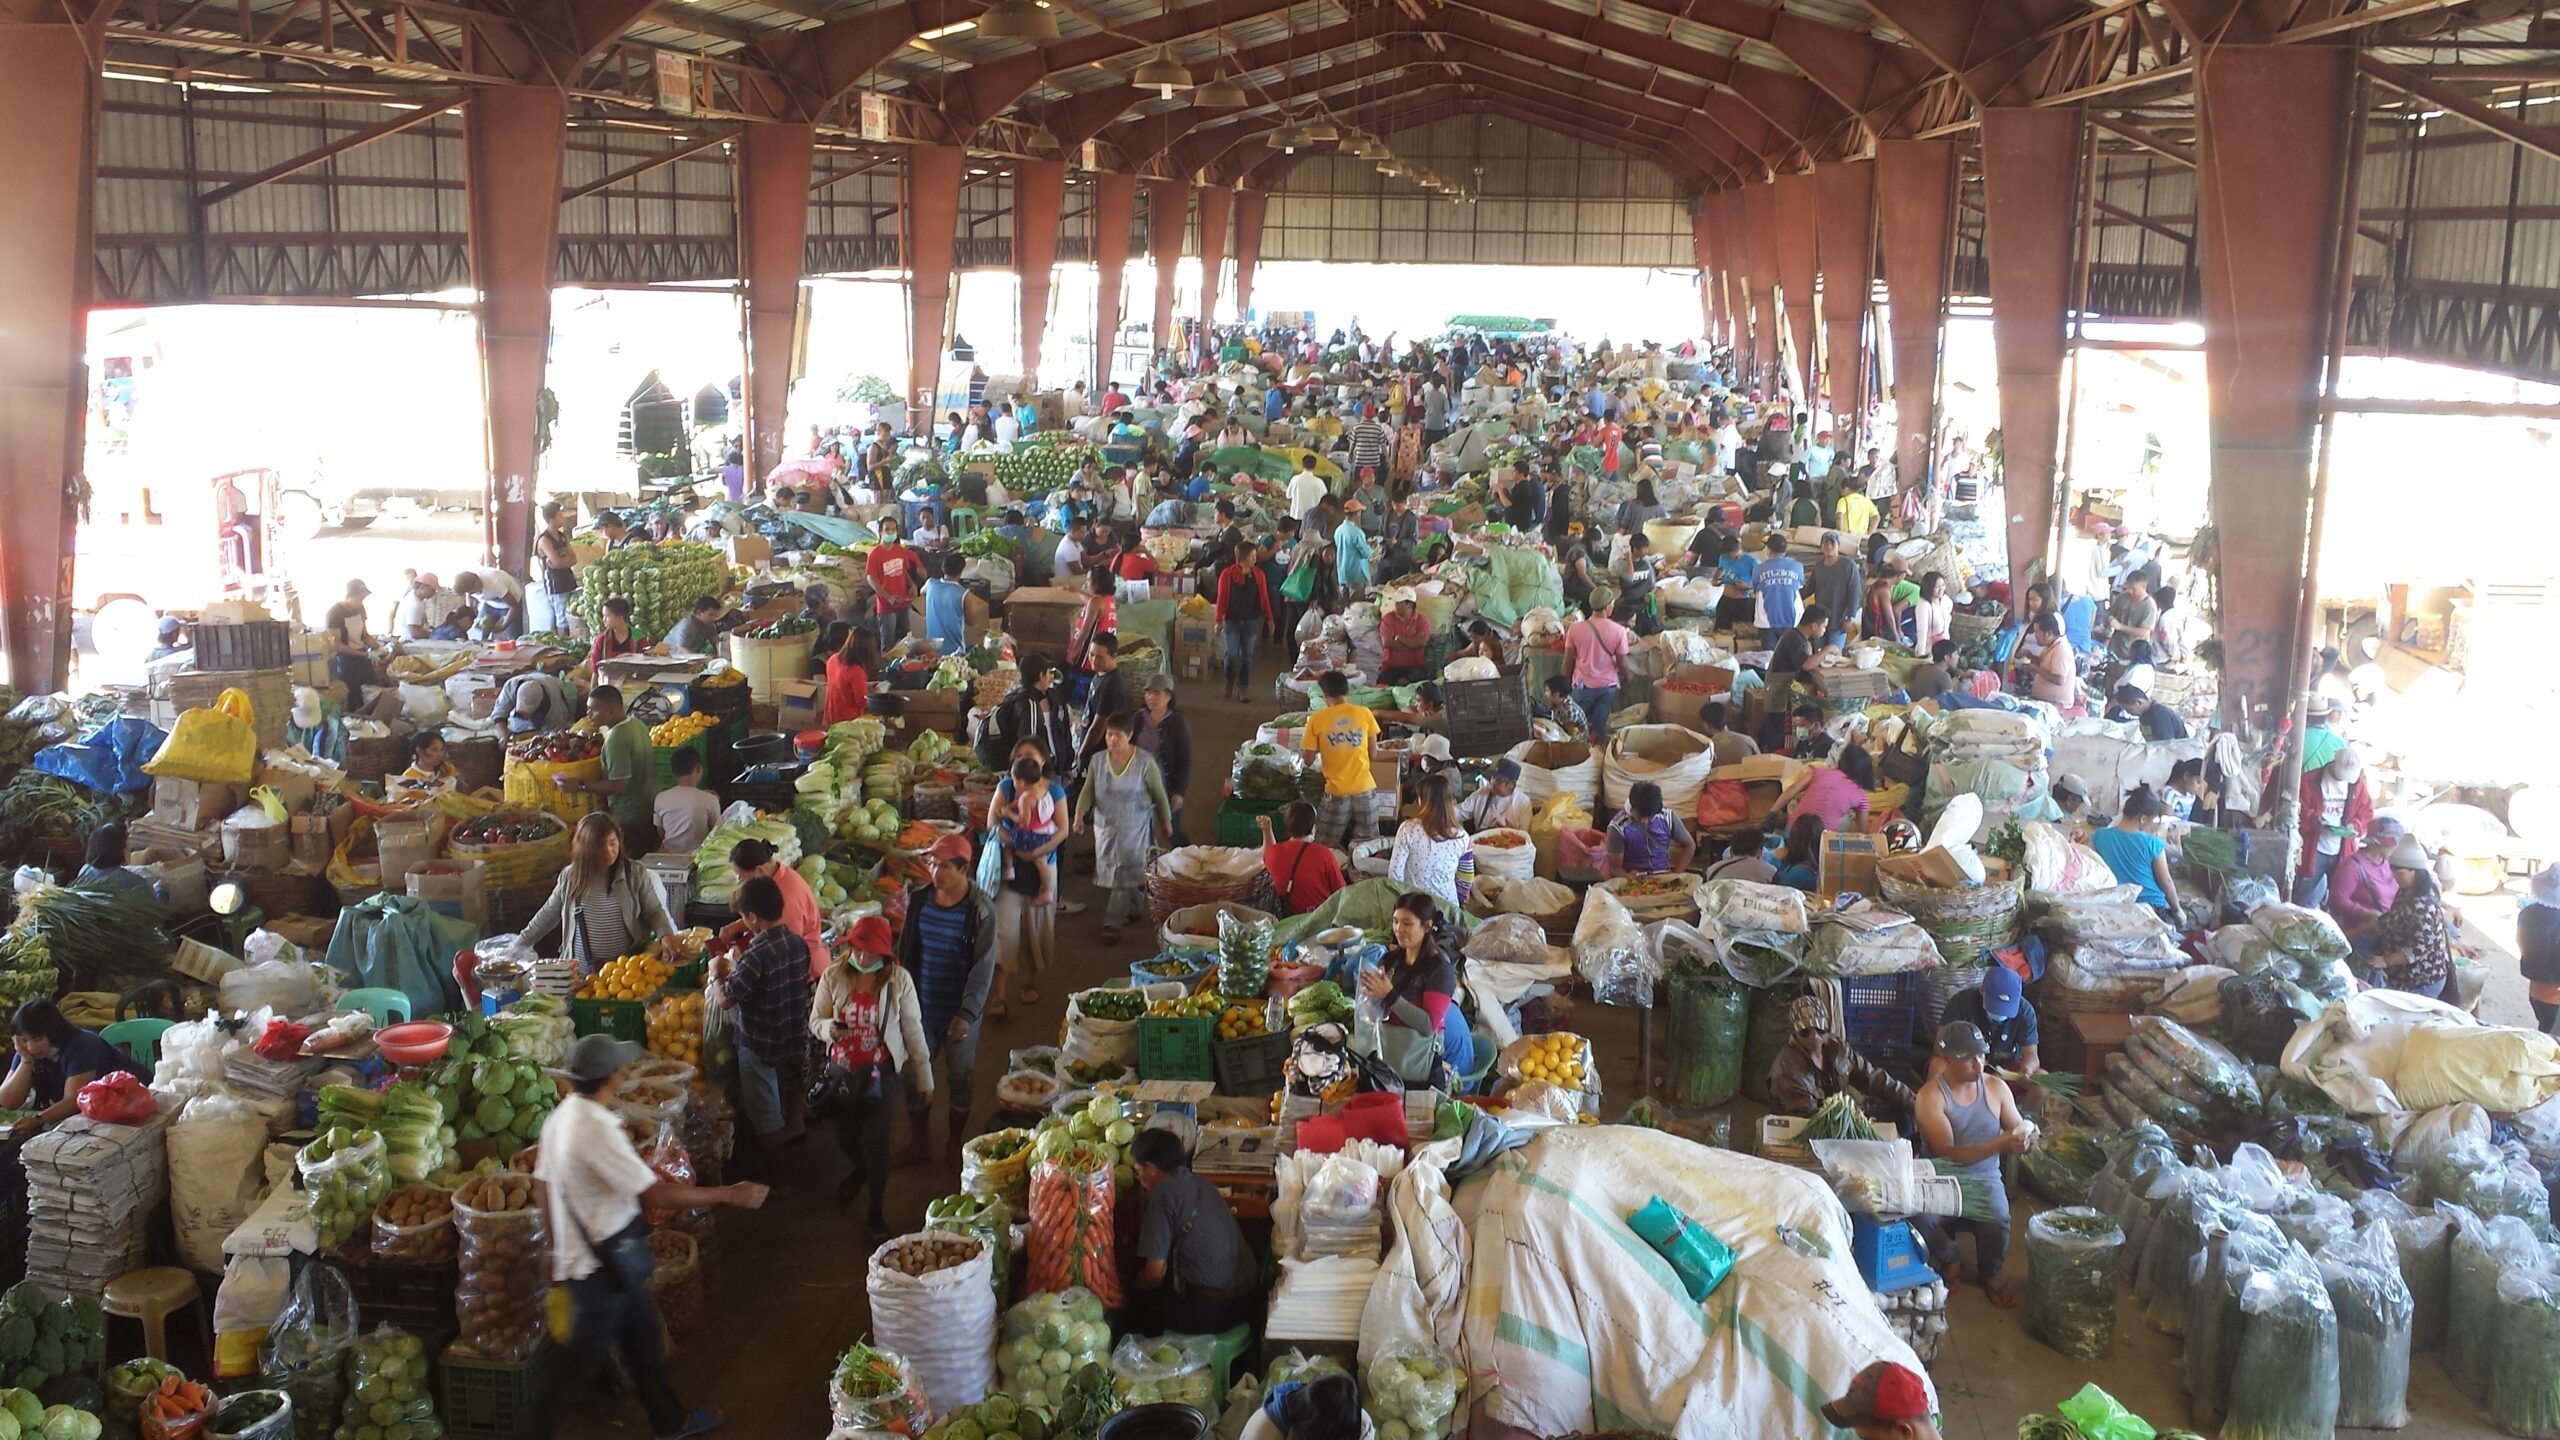 Court halts eviction of farmers at Benguet vegetable trading post